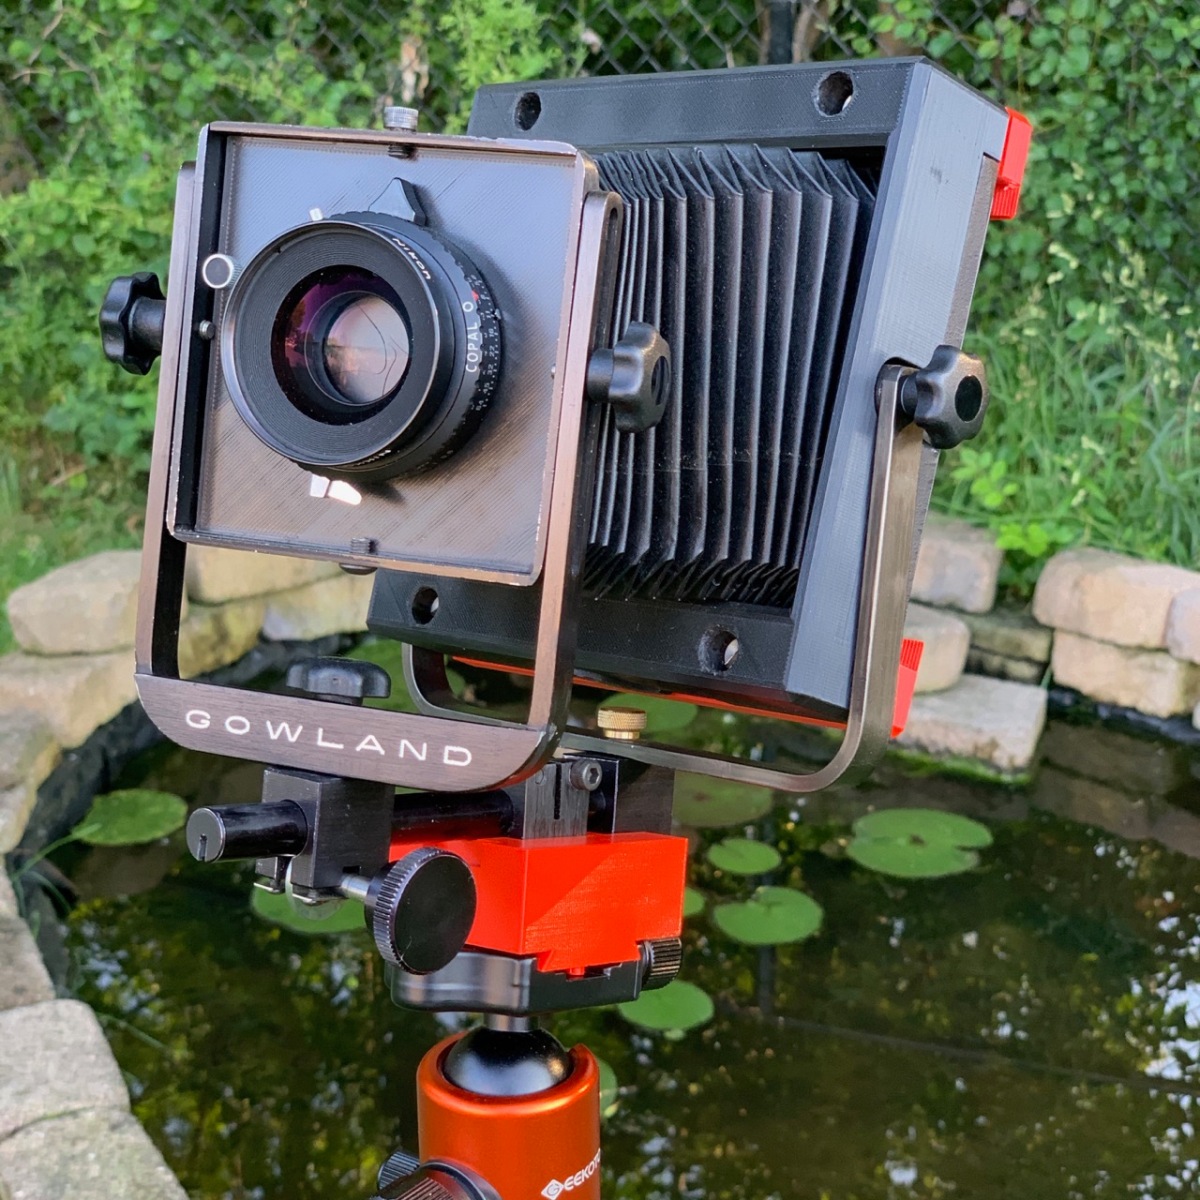 Gowland Pocket View Camera with modifications shown on tripod in front of pond.